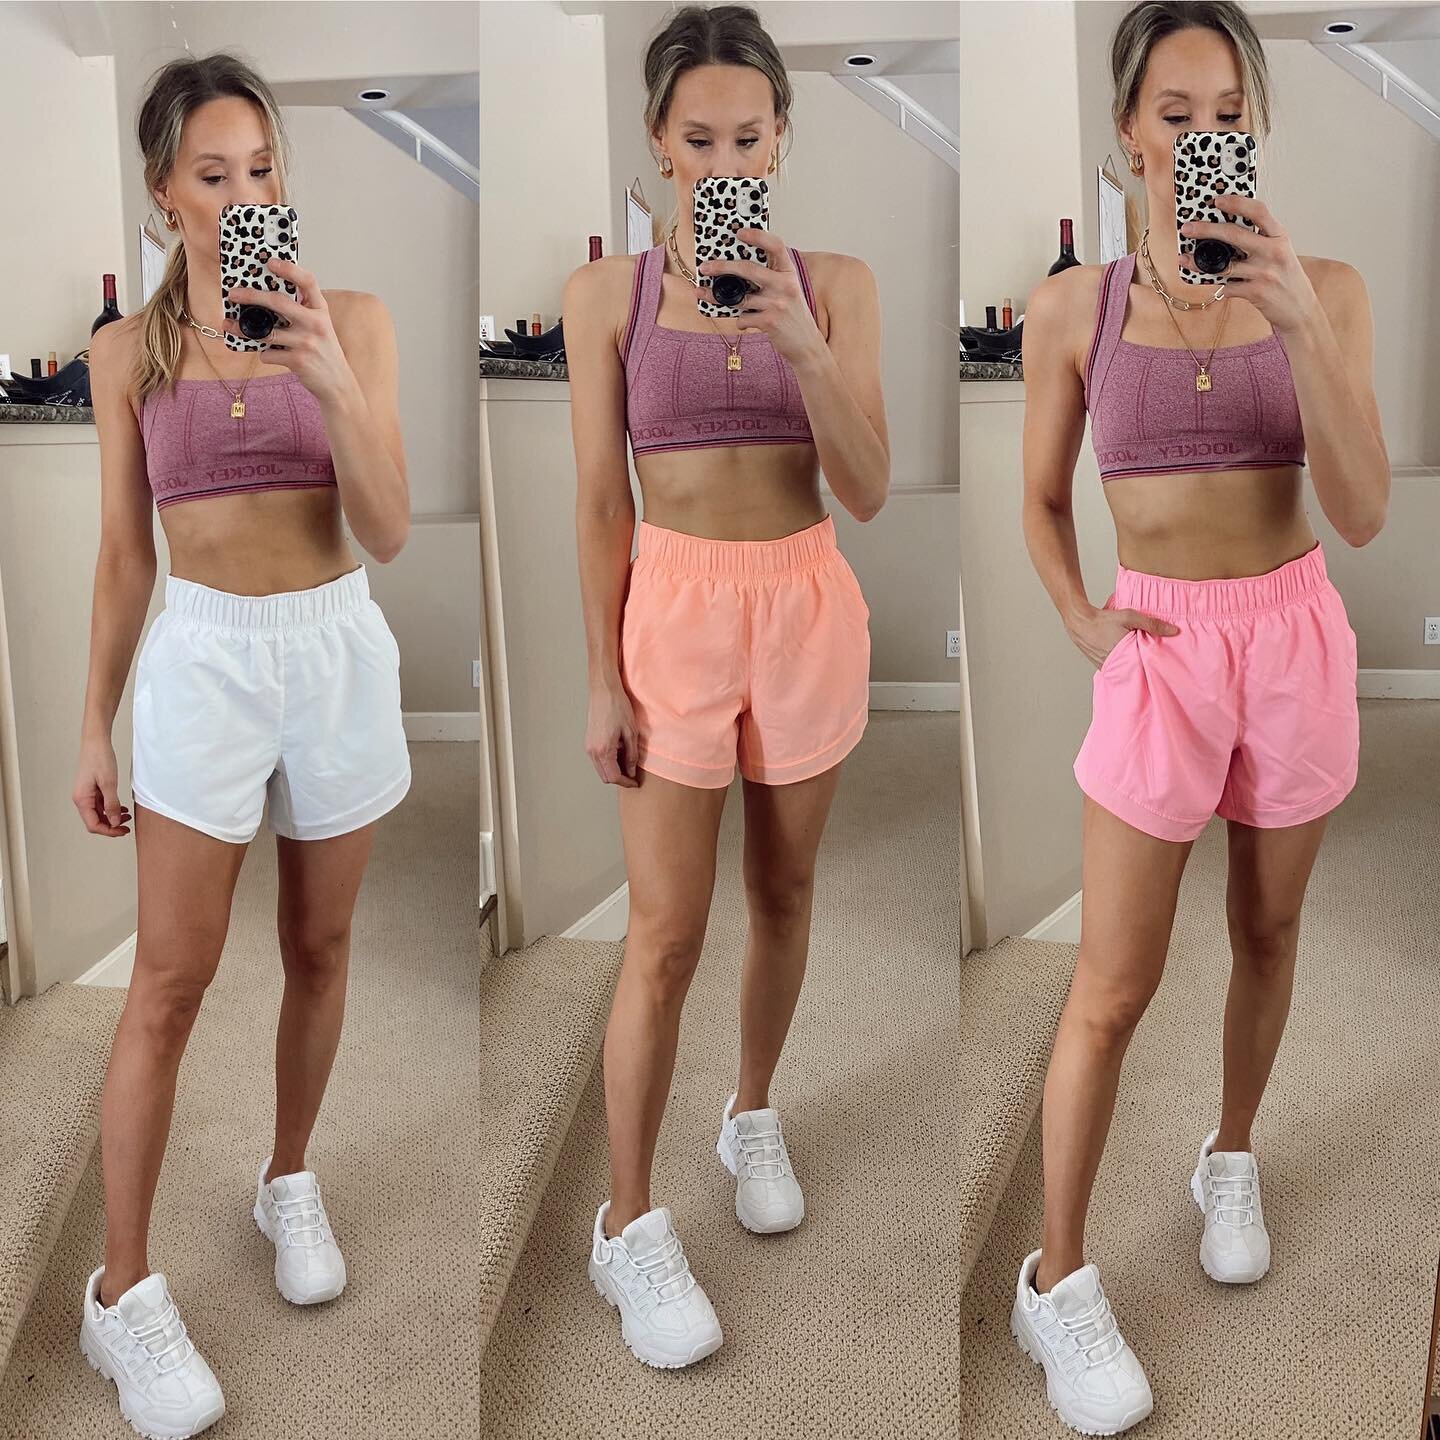 Best shorts ever $10 a piece and lots of colors to choose from!! Built in underwear, high waisted and pockets! Just ordered them in black because.. they are just that good🙃 linked in my bio or of course follow me on LTKit! #walmartfinds #walmartfash